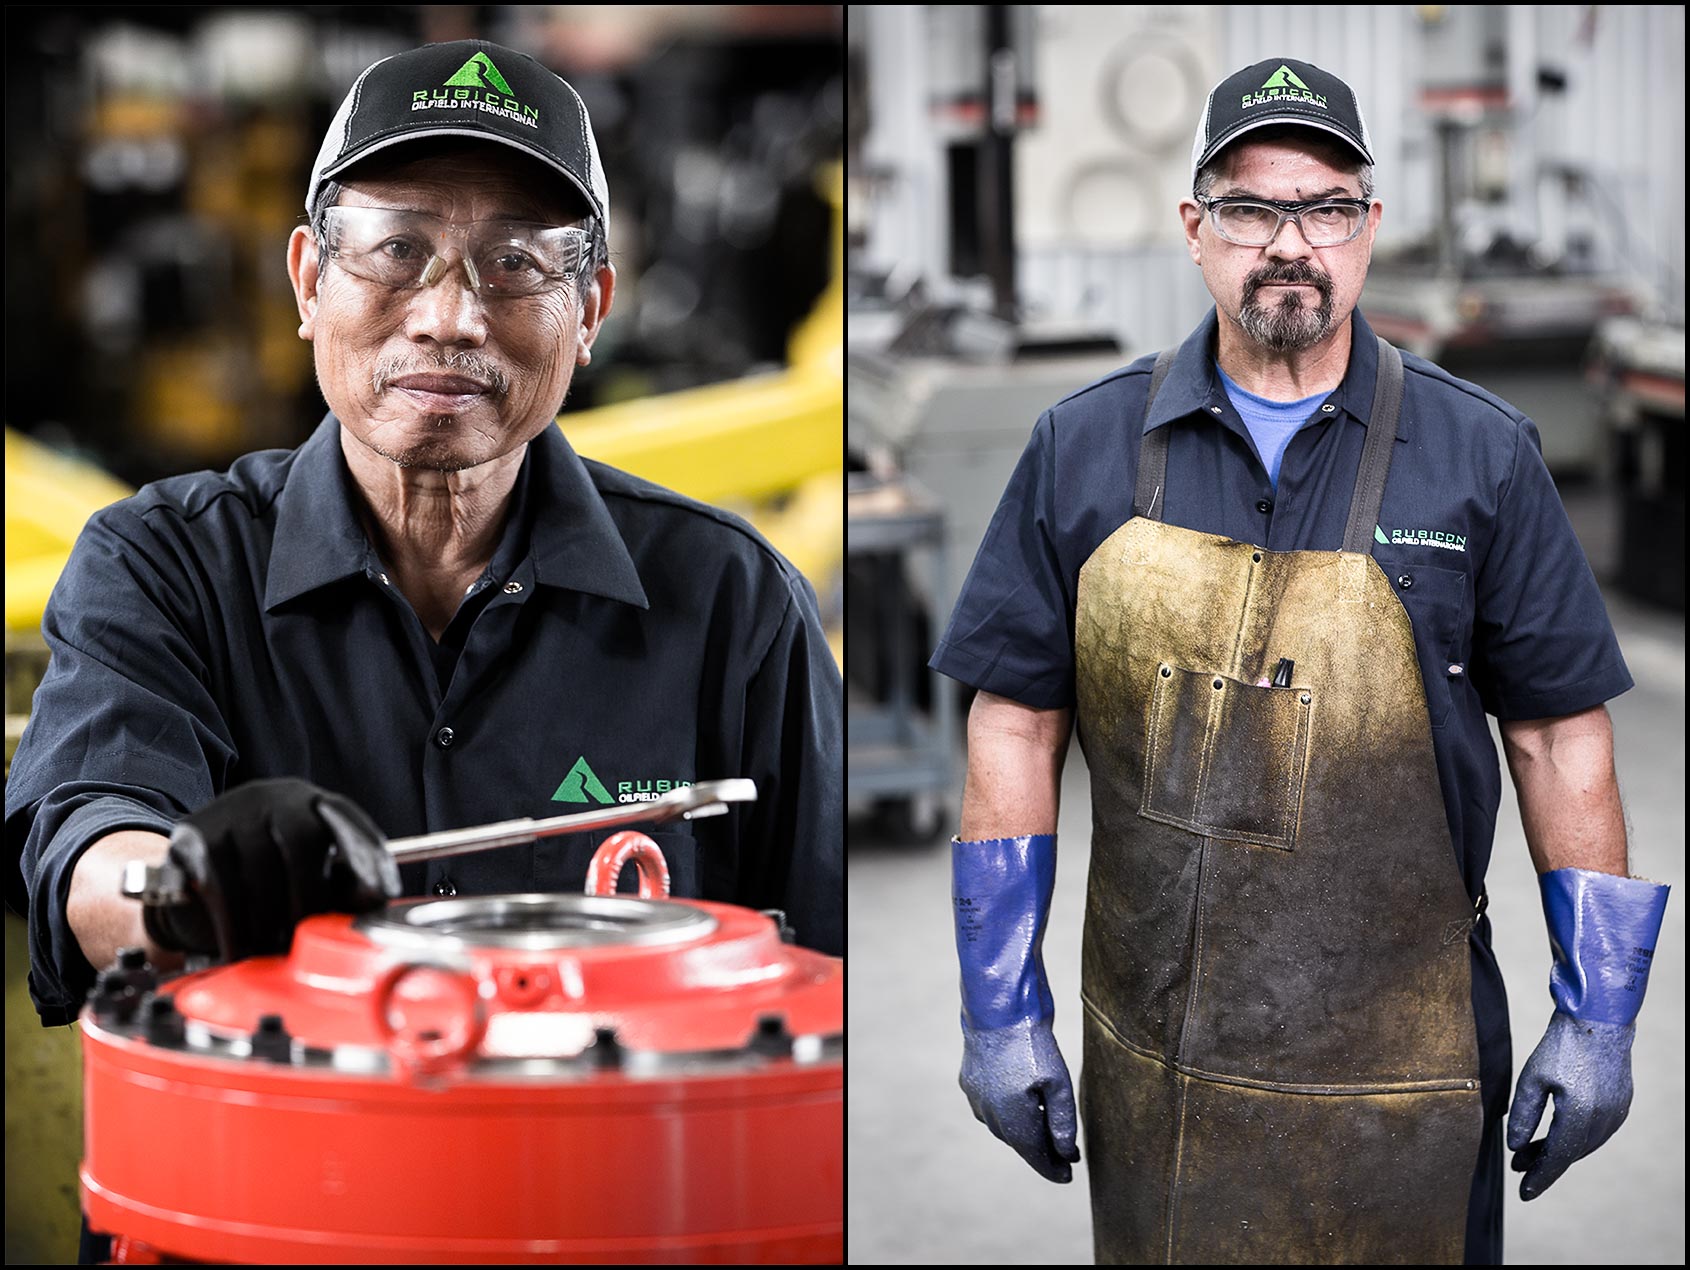 Portraits of workers inside an oilfield tool factory machine shop.